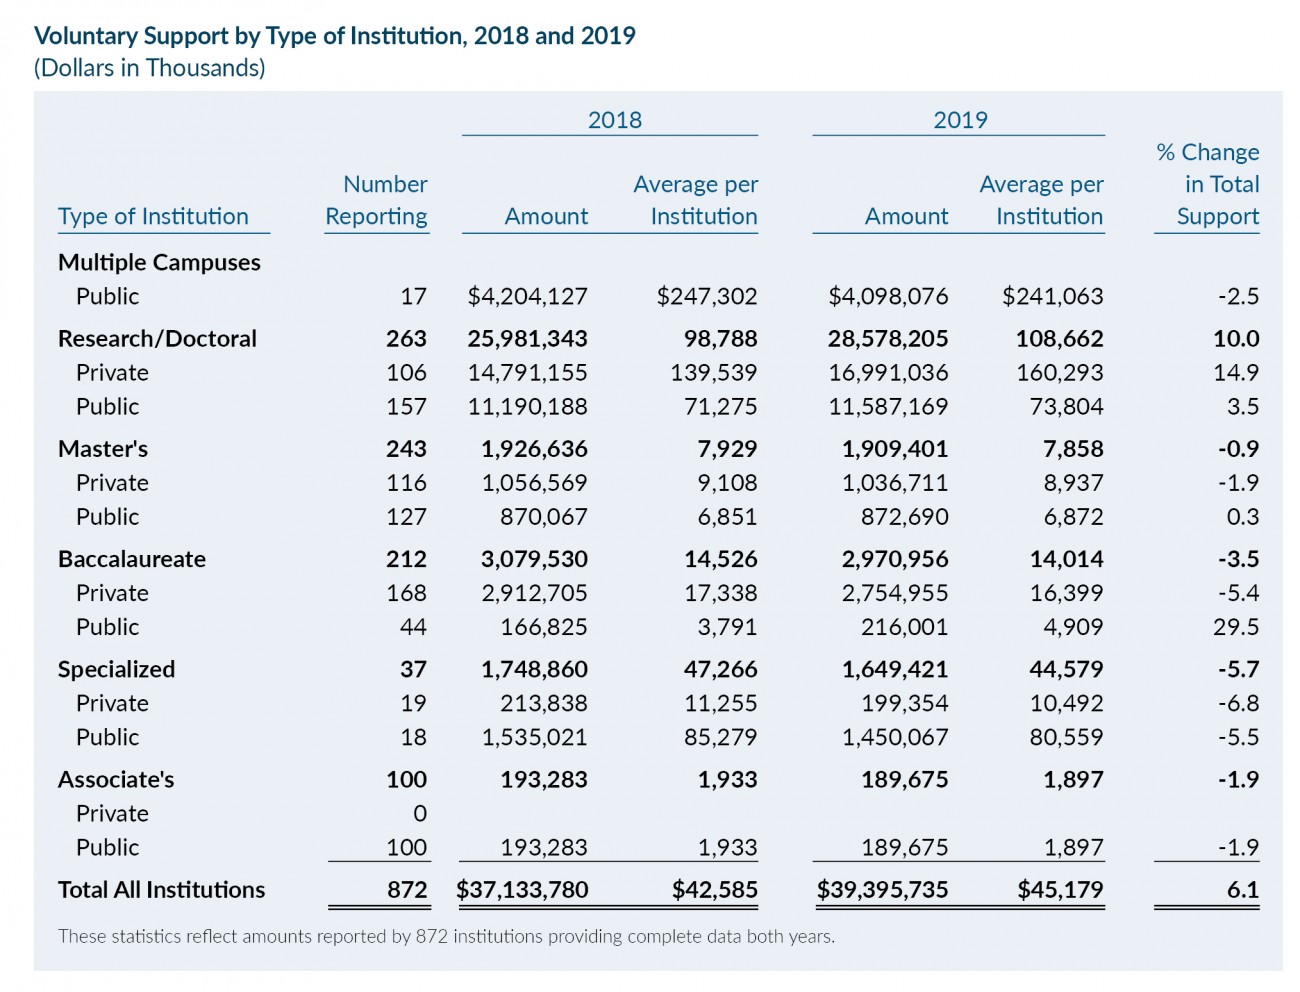 Table: Voluntary Support by Type of Institution, 2018 and 2019